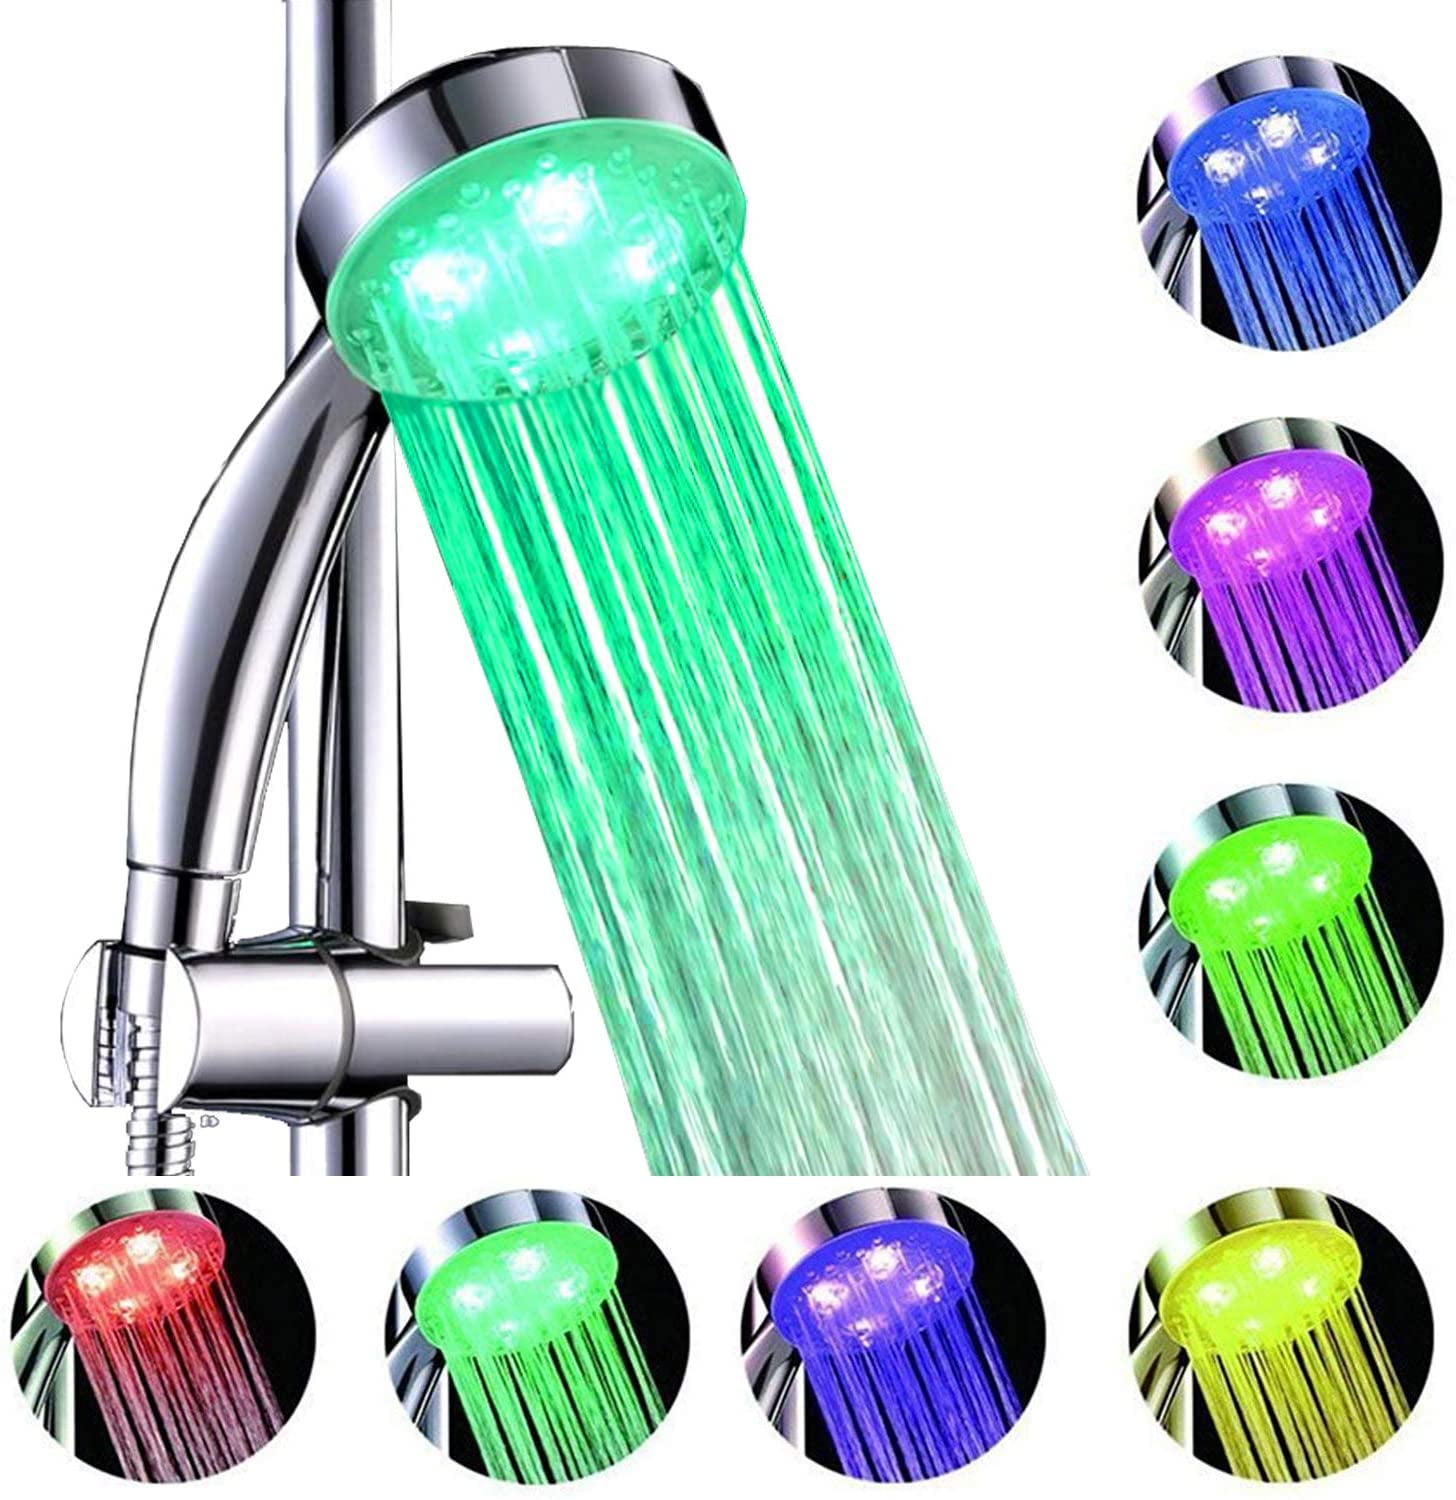 Vzer 8 inch Square 7 Colors Automatic Changing LED Shower Head Bathroom Showerheads Sprinkler